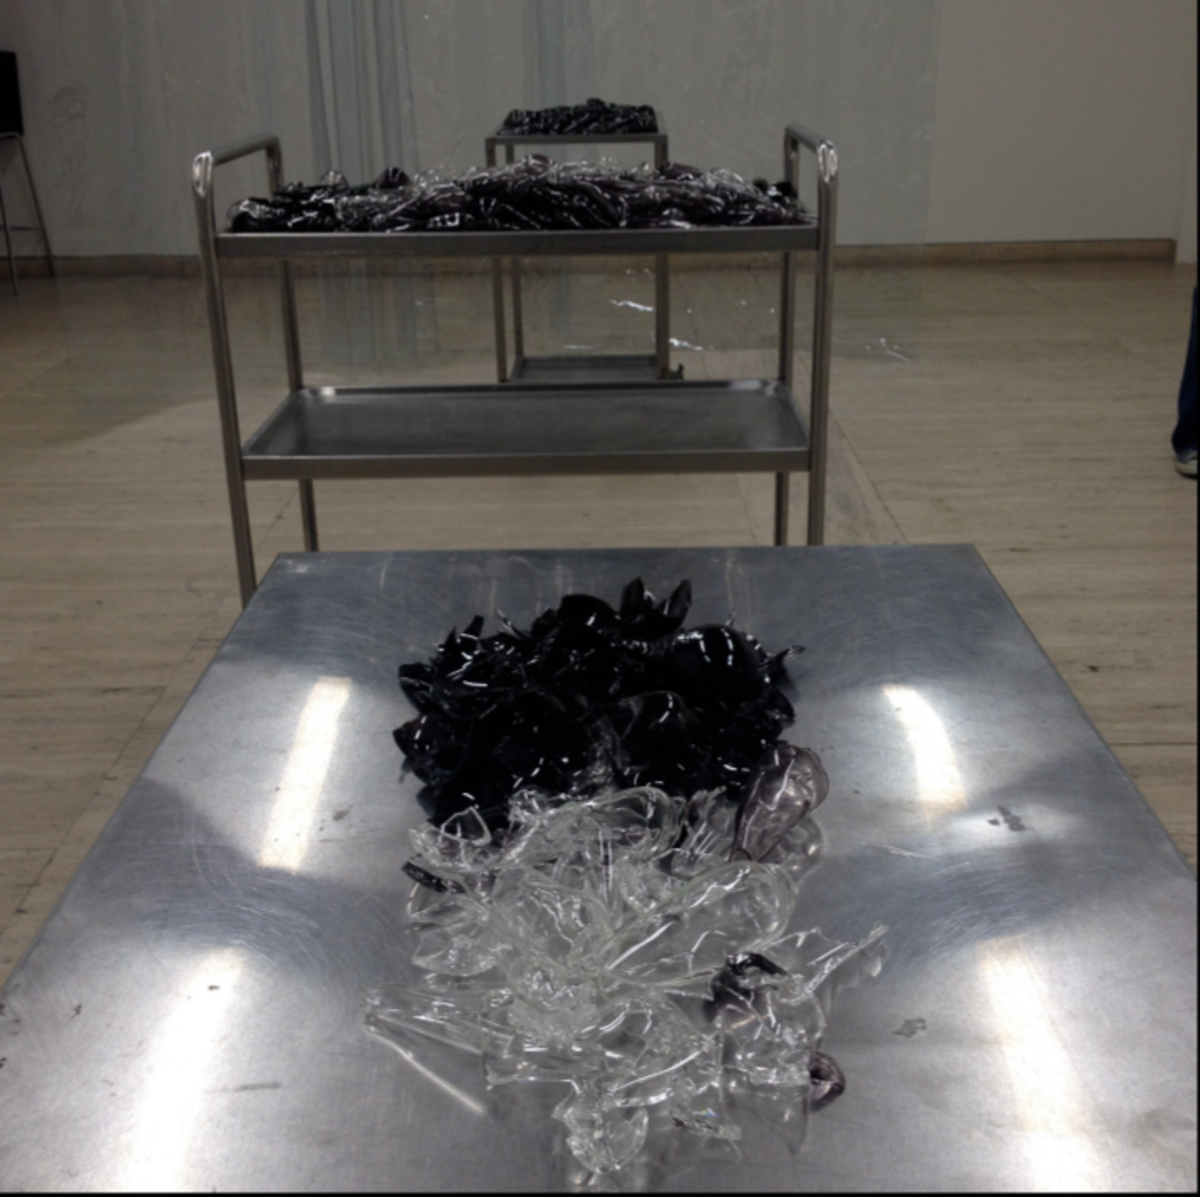 Figure 1: Yhonnie Scarce, Weak in Colour, Strong in Blood, 2013-2014, Blown glass and found objects, size variable. 19th Biennale of Sydney, Images taken from Kylie Neagle at Art Gallery of New South Wales Gallery.